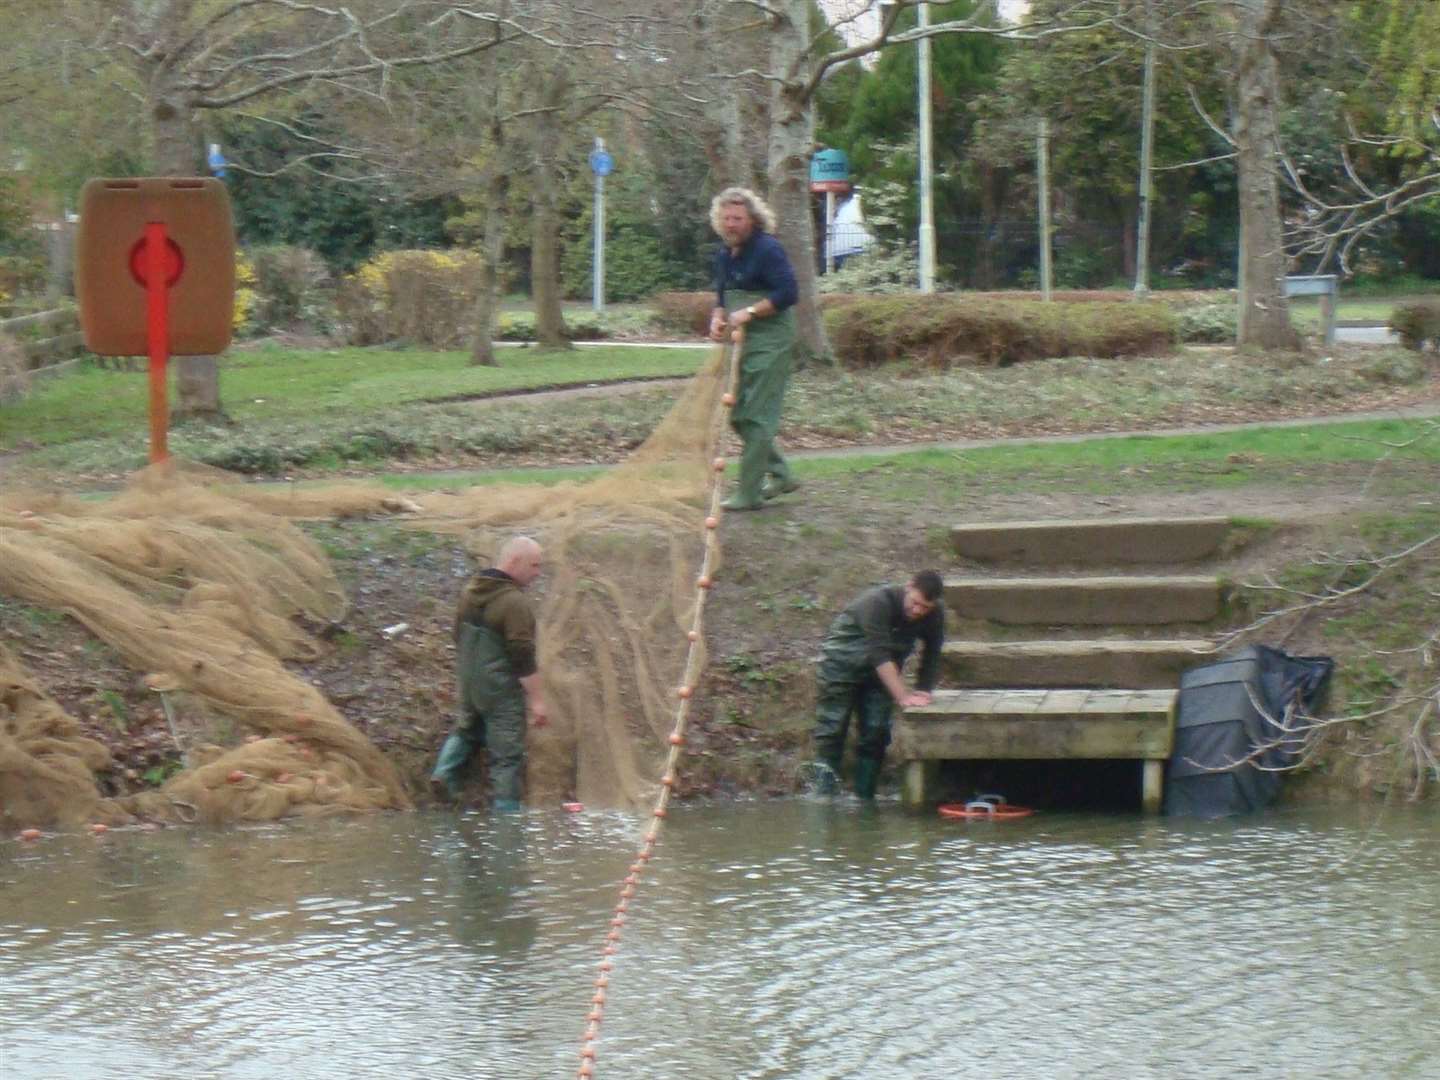 The fish were removed from the moat in Park Farm last week. Picture: Anthony Mathews